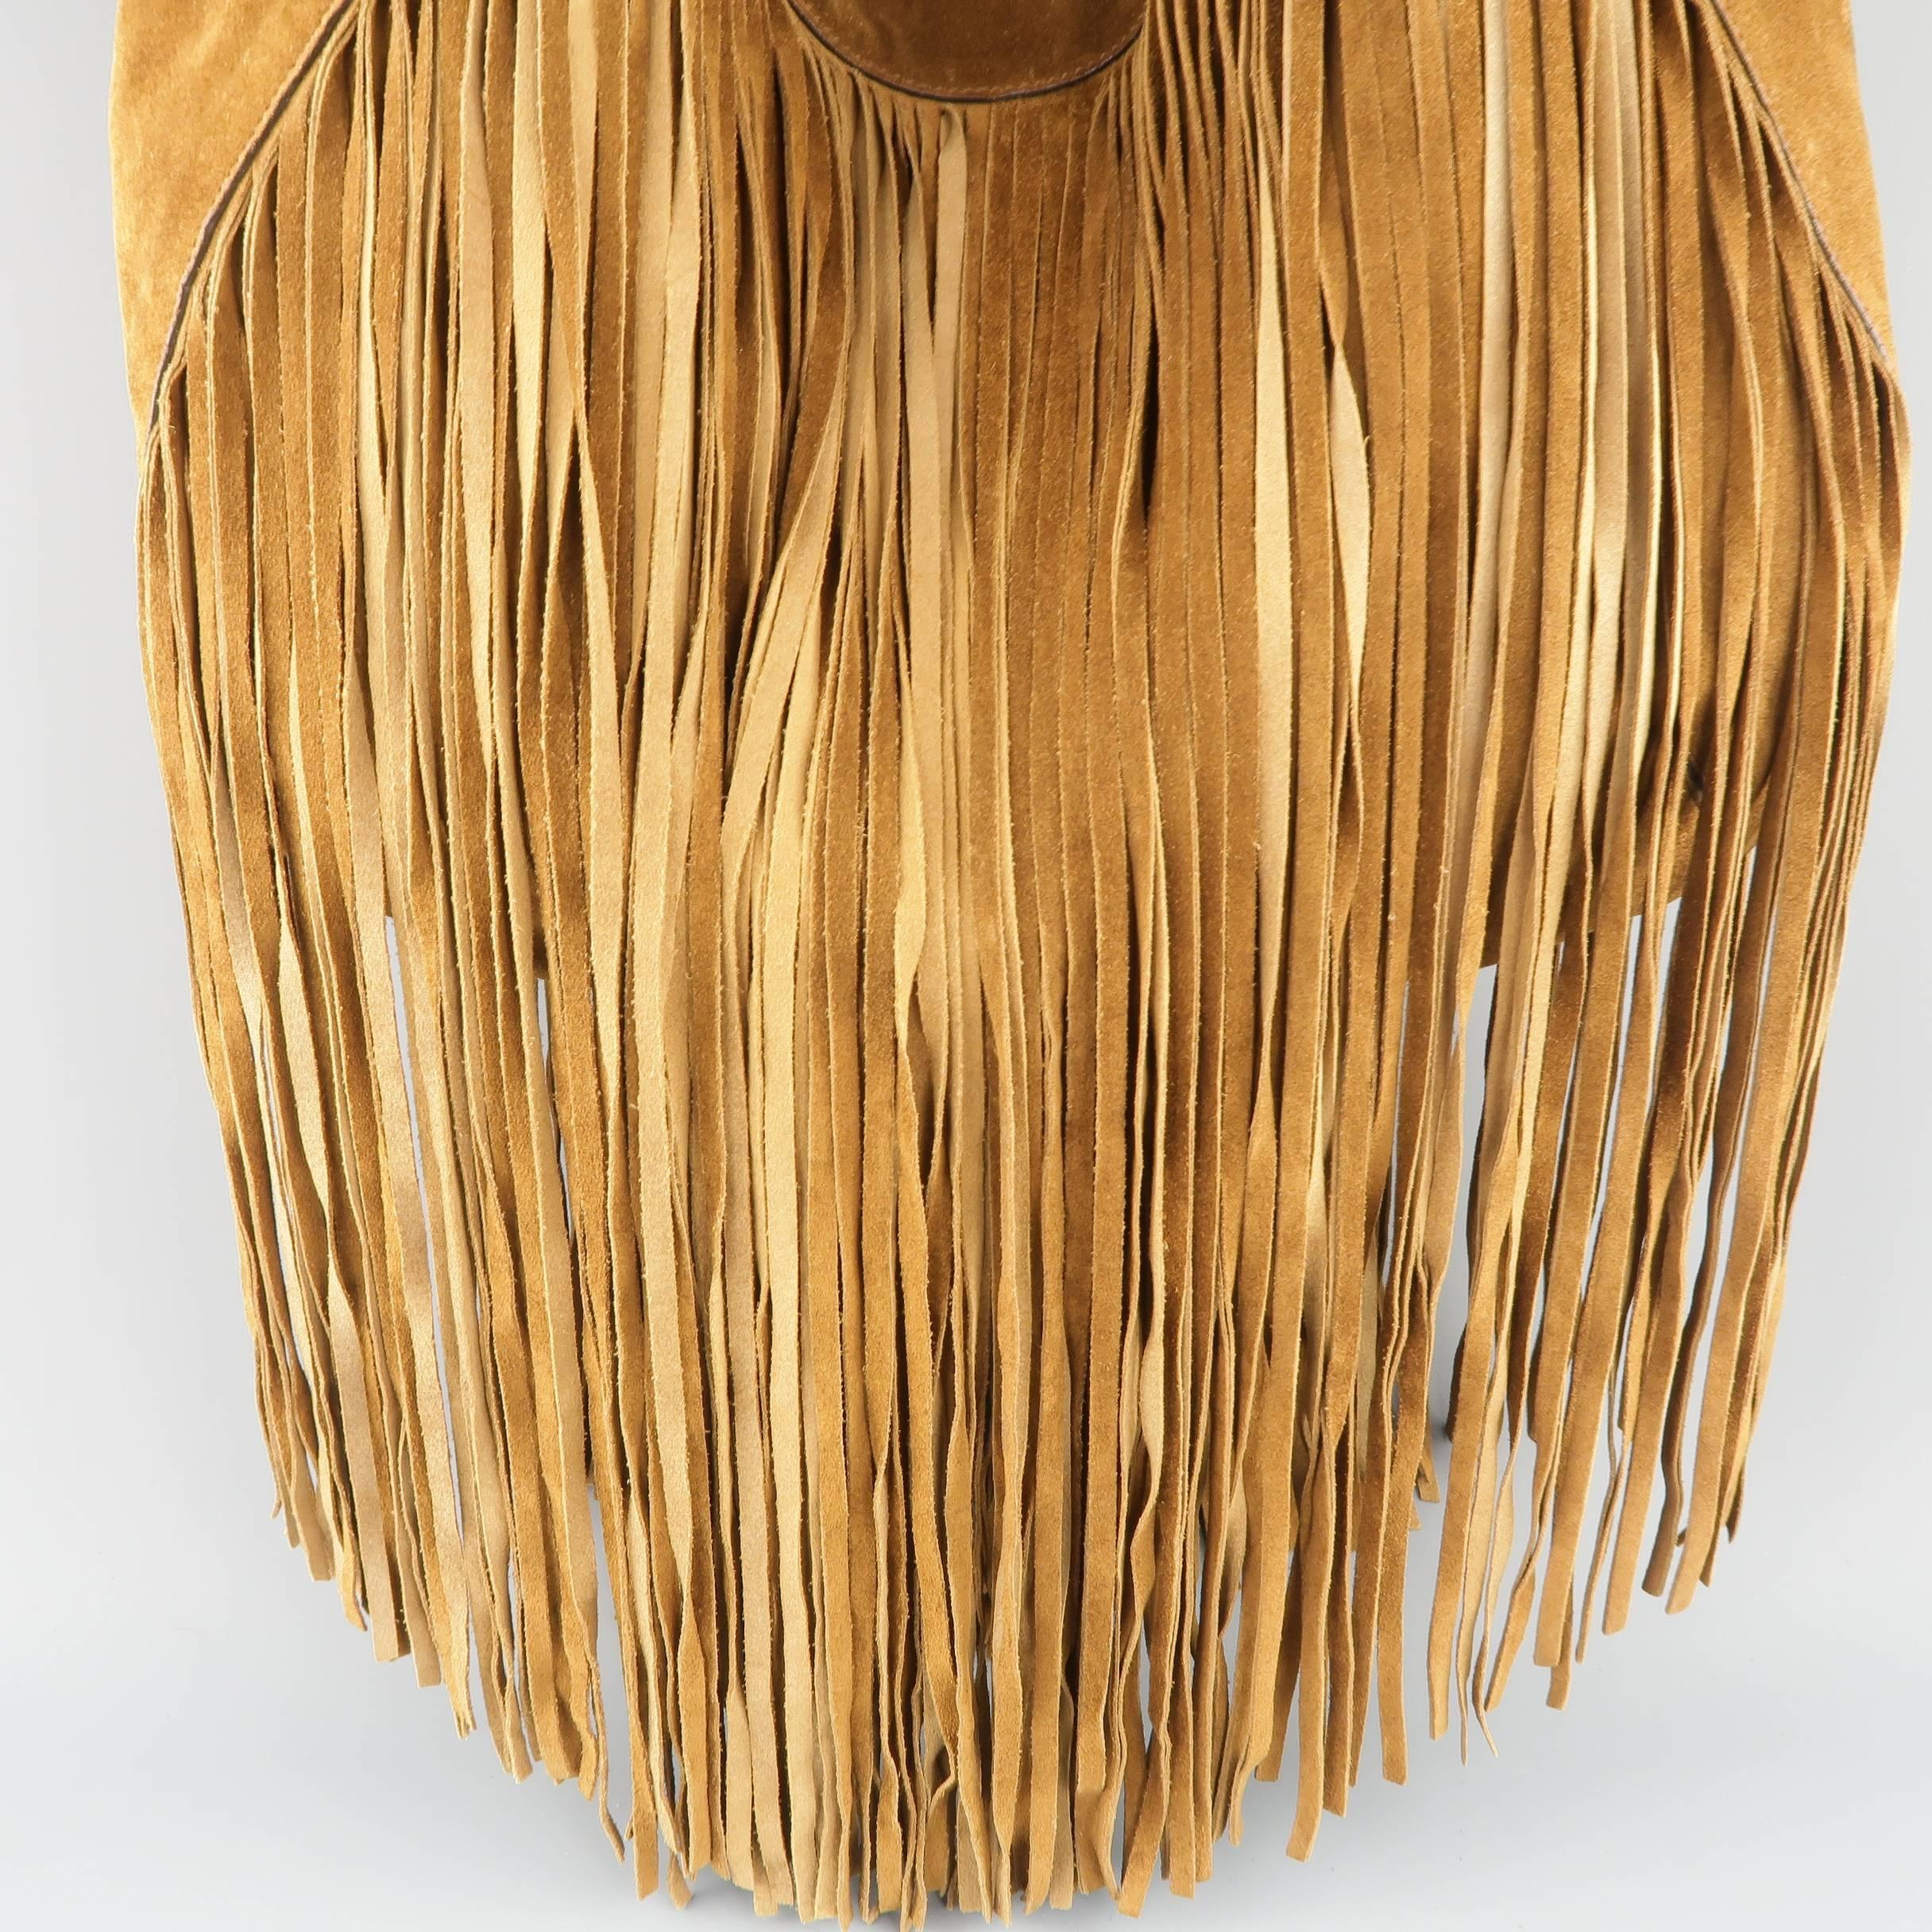 RALPH LAUREN hobo shoulder bag comes in tan brown suede and features double adjustable top handles with gold tone buckle hardware, embossed metal Proprietor tag, and long fringe trim. Marks shown in detail shots. As-is. Made in Italy.
 
Fair